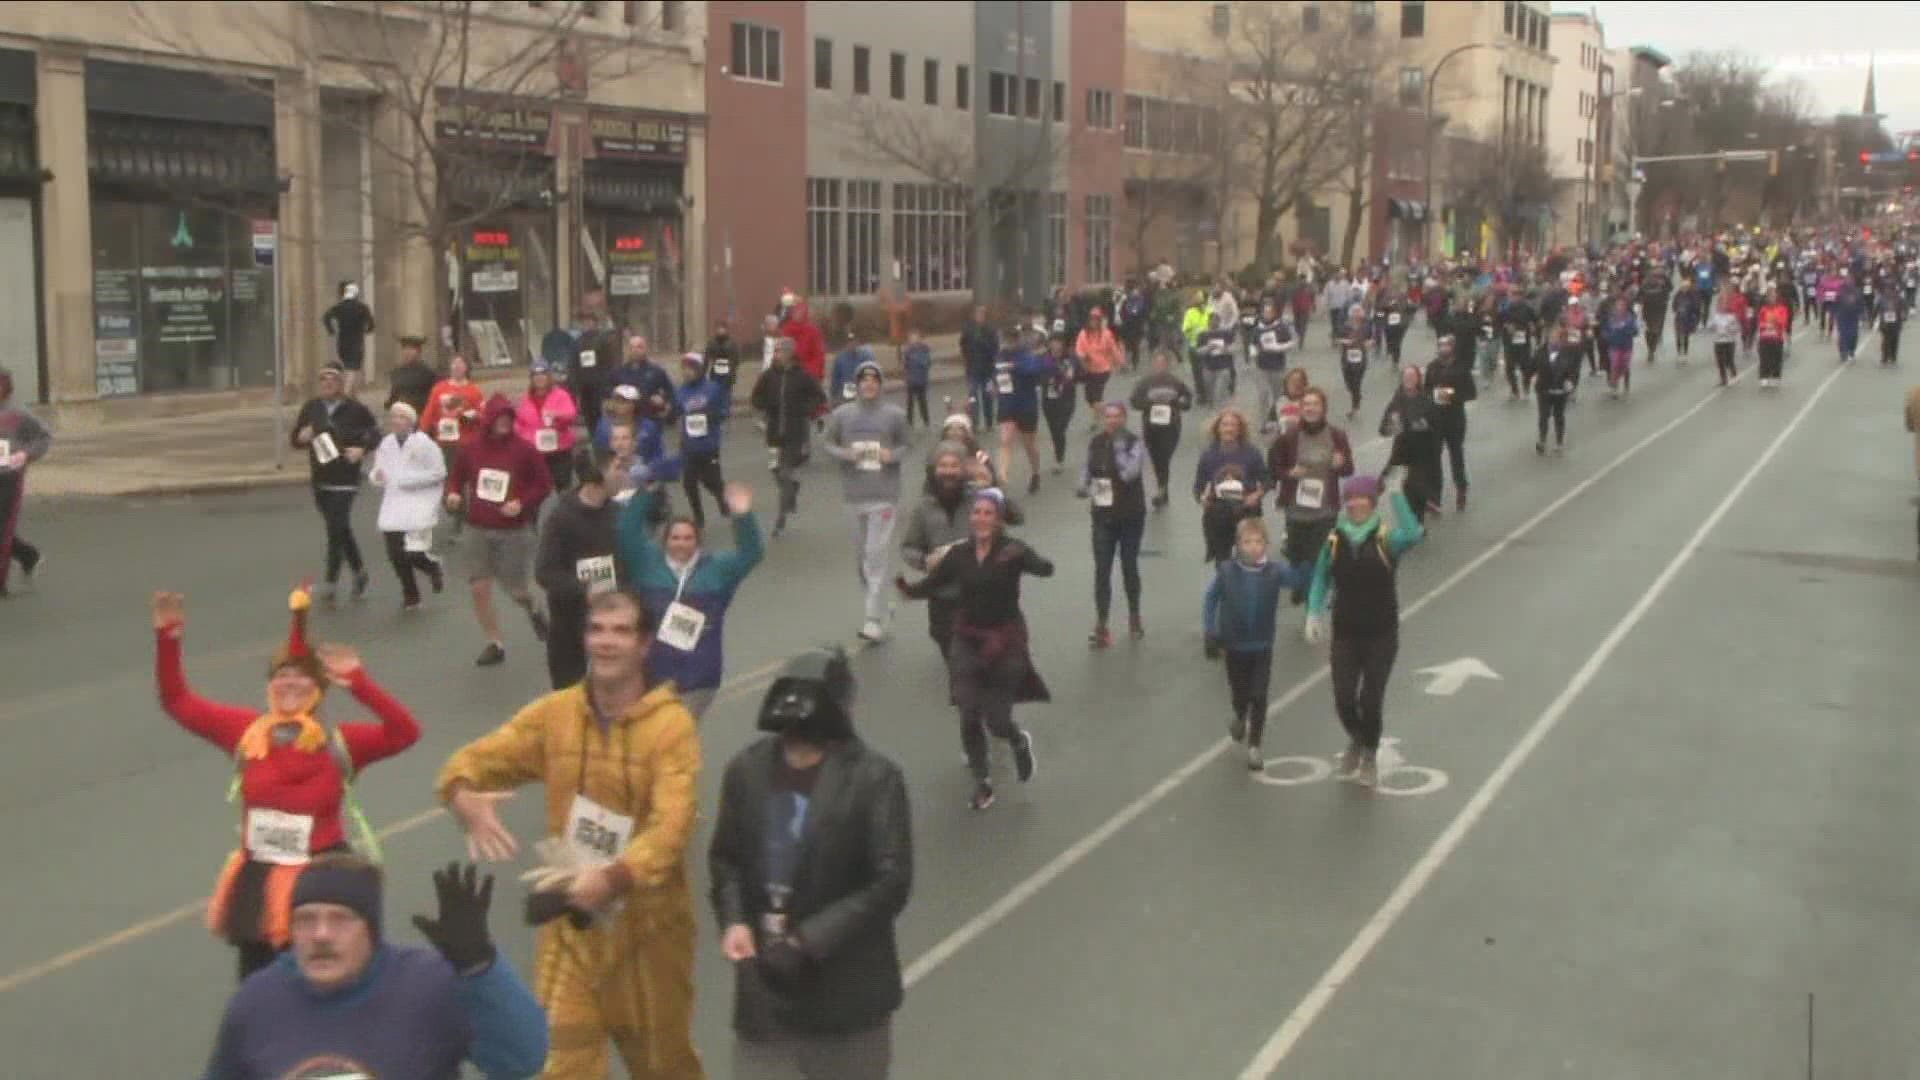 The 127th annual Turkey Trot is back this Thanksgiving morning in the City of Buffalo!